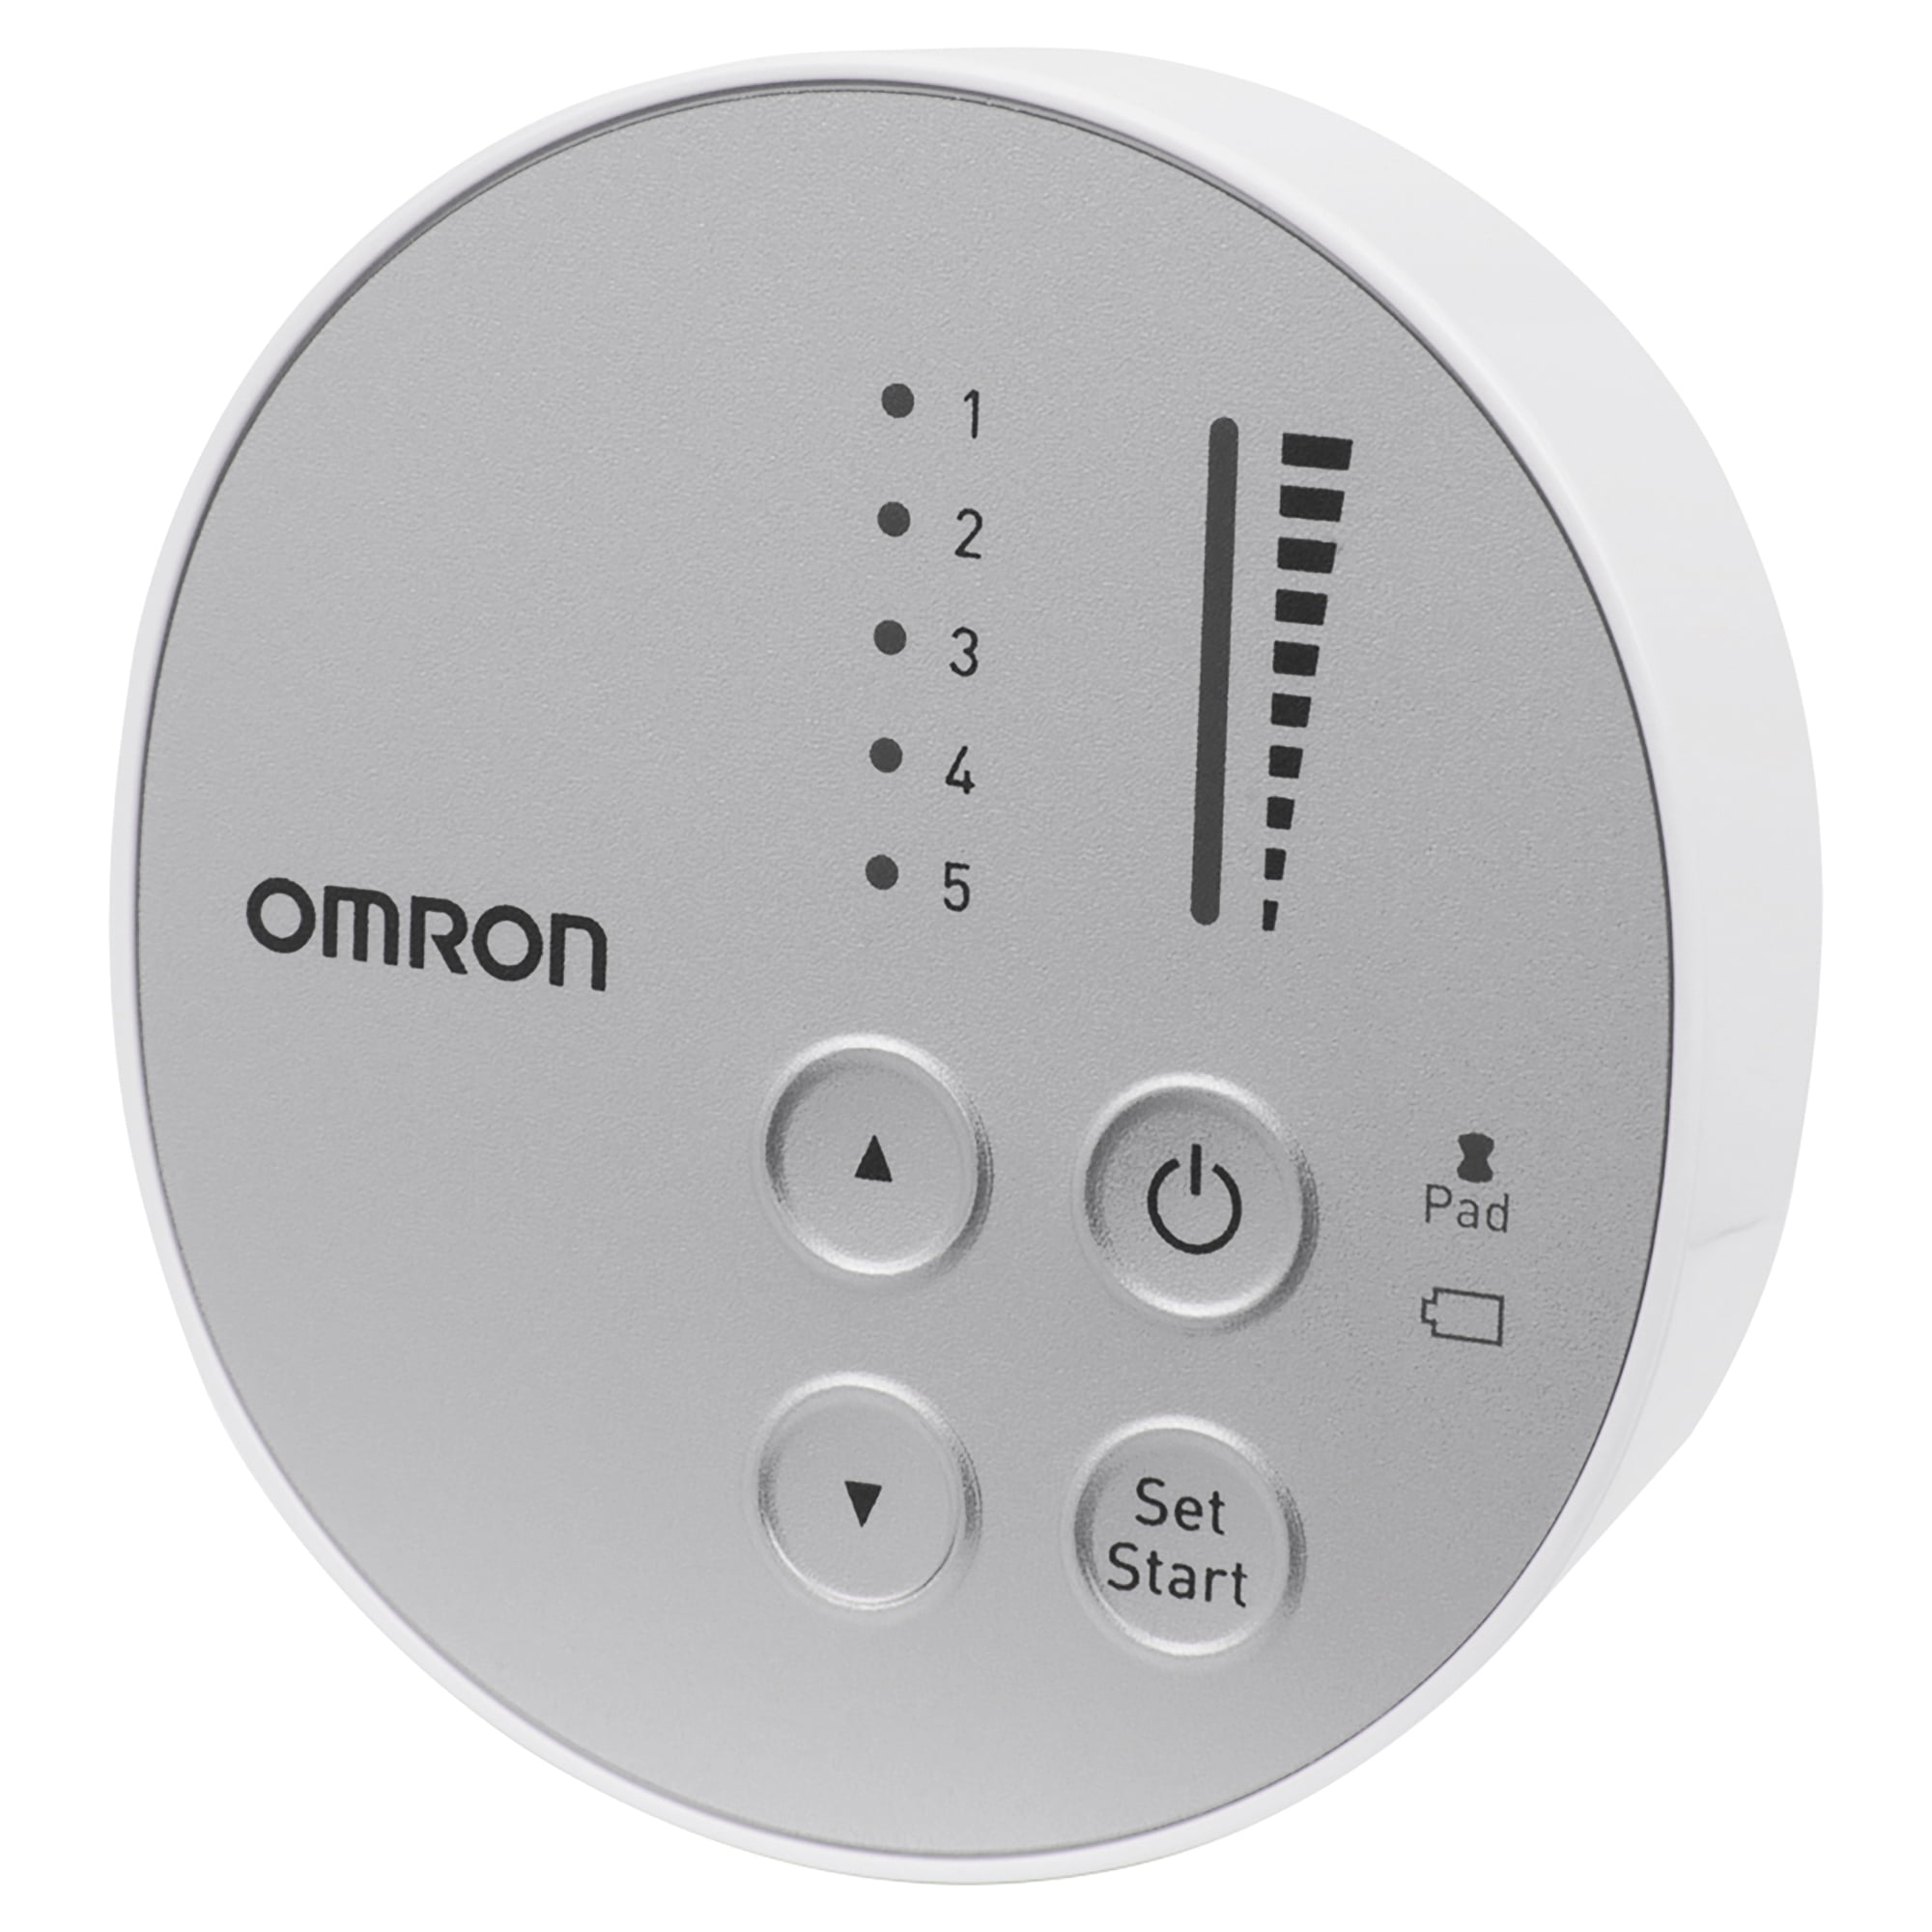 OMRON Total Power + Heat™ TENS Unit